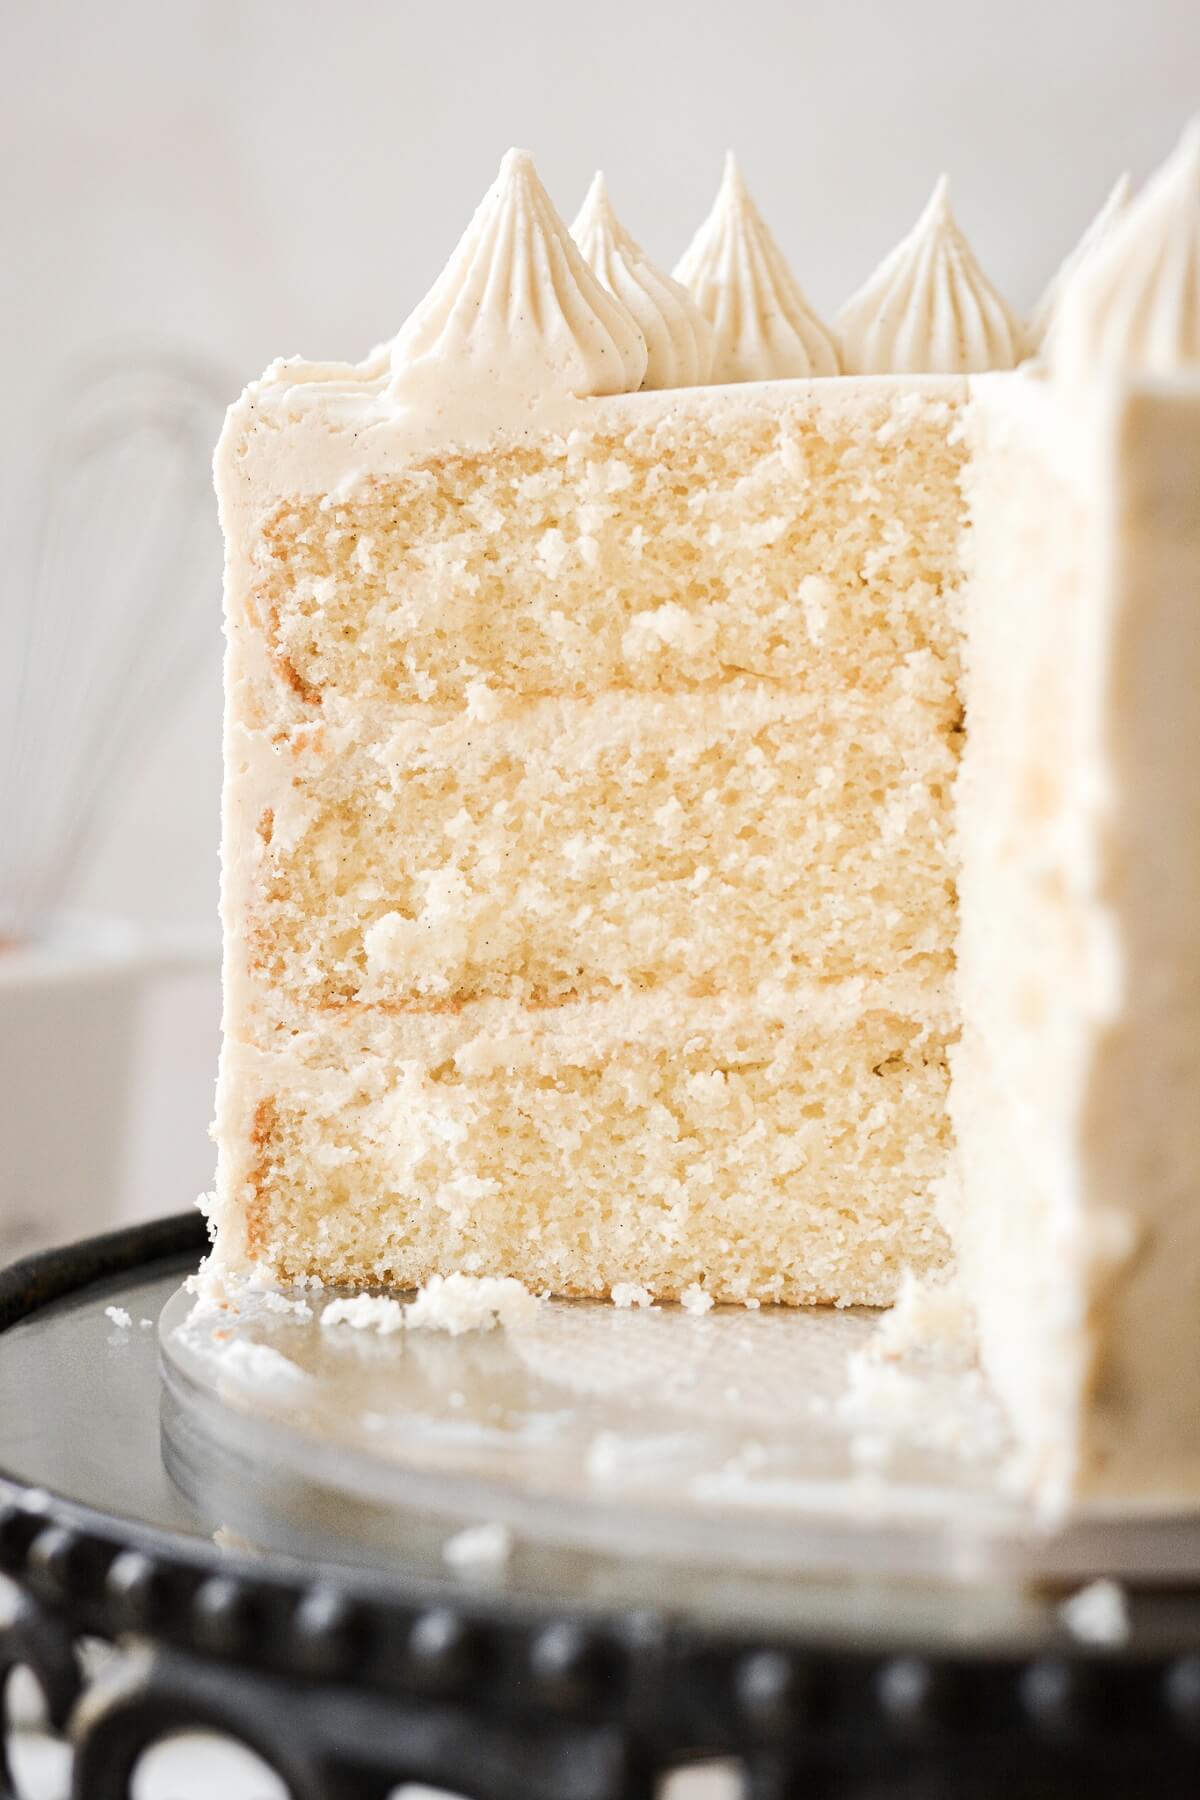 Banana layer cake with a slice cut to show the layers inside.